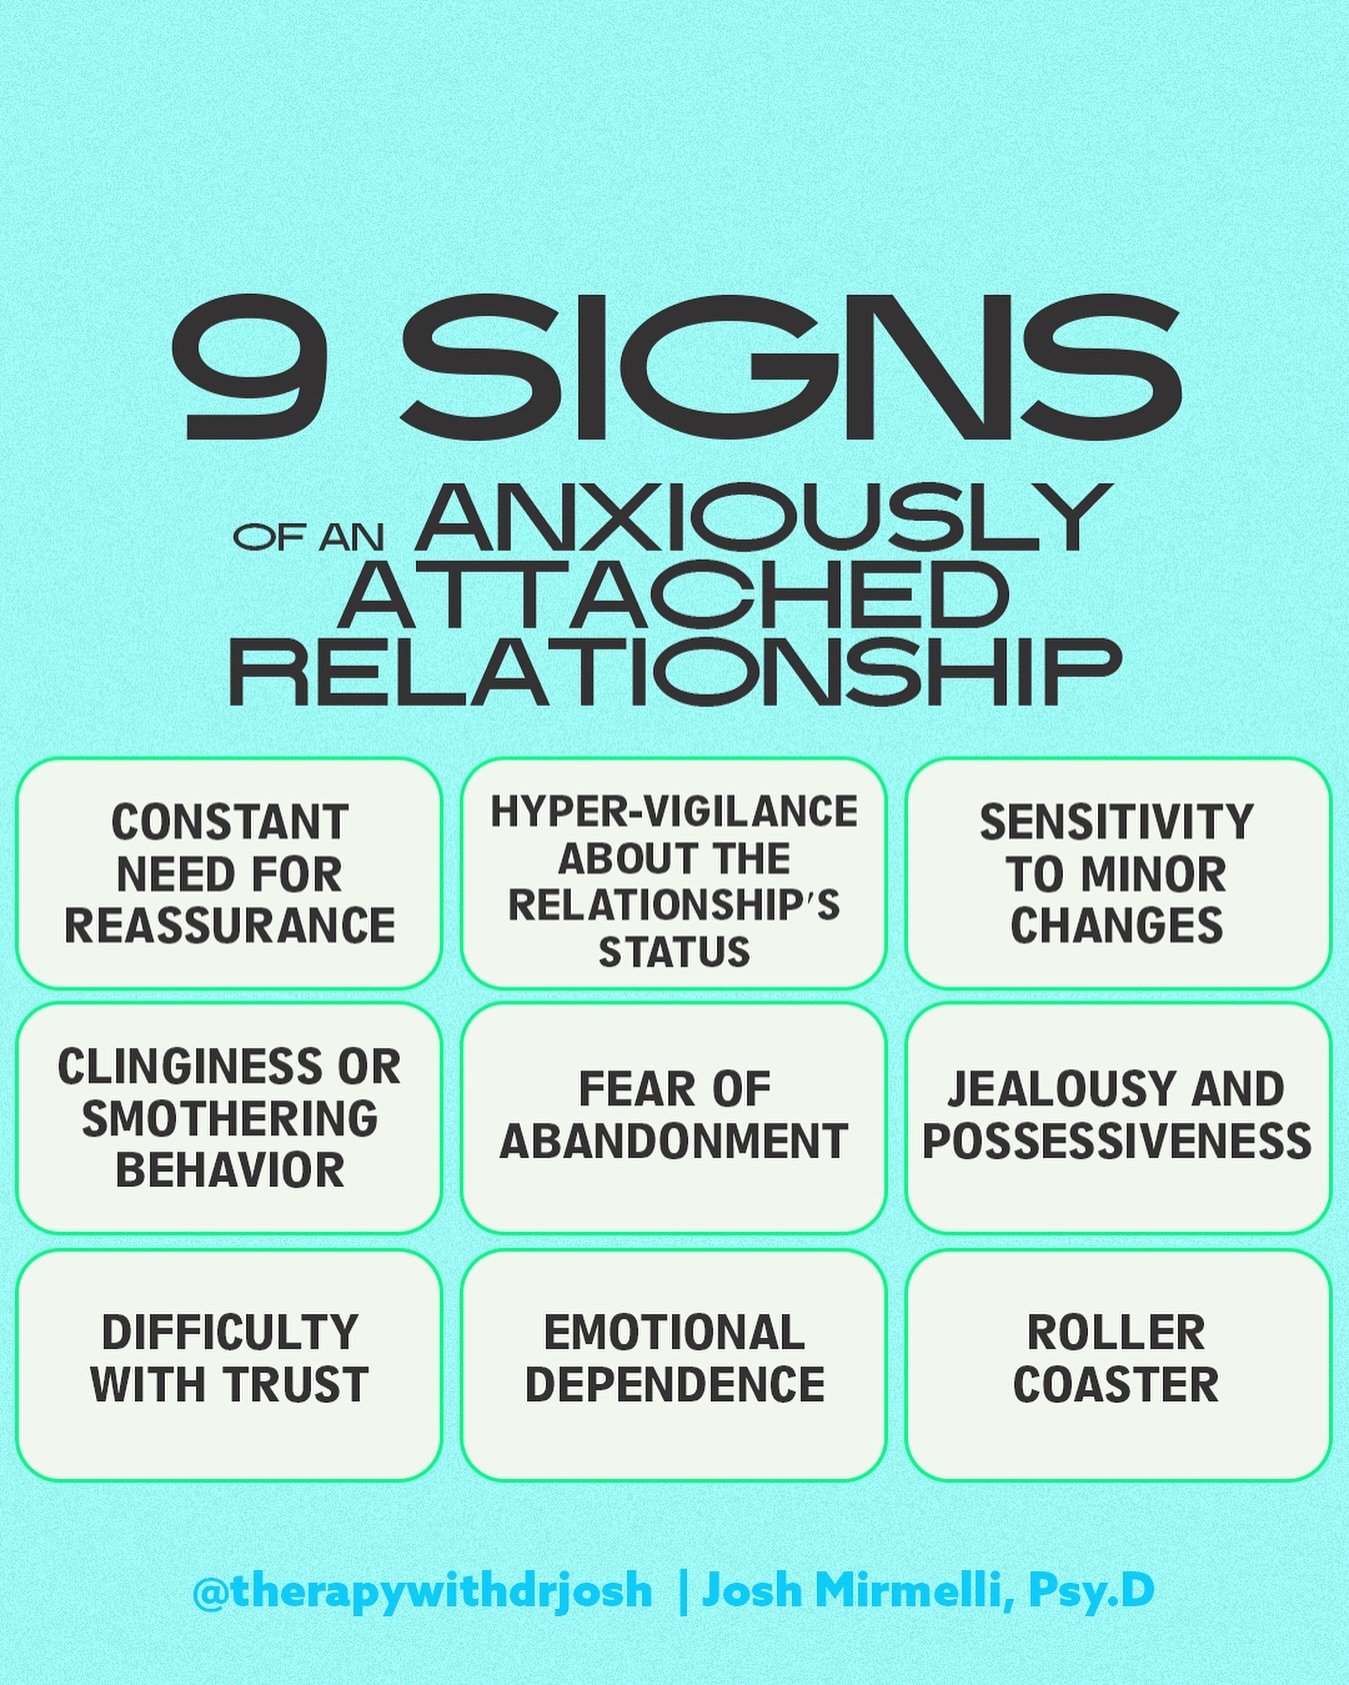 In anxiously attached relationships, individuals may exhibit behaviors that signal insecurity and fear of abandonment. These signs highlight the struggle of those with anxious attachment tendencies to establish a sense of security and stability in re